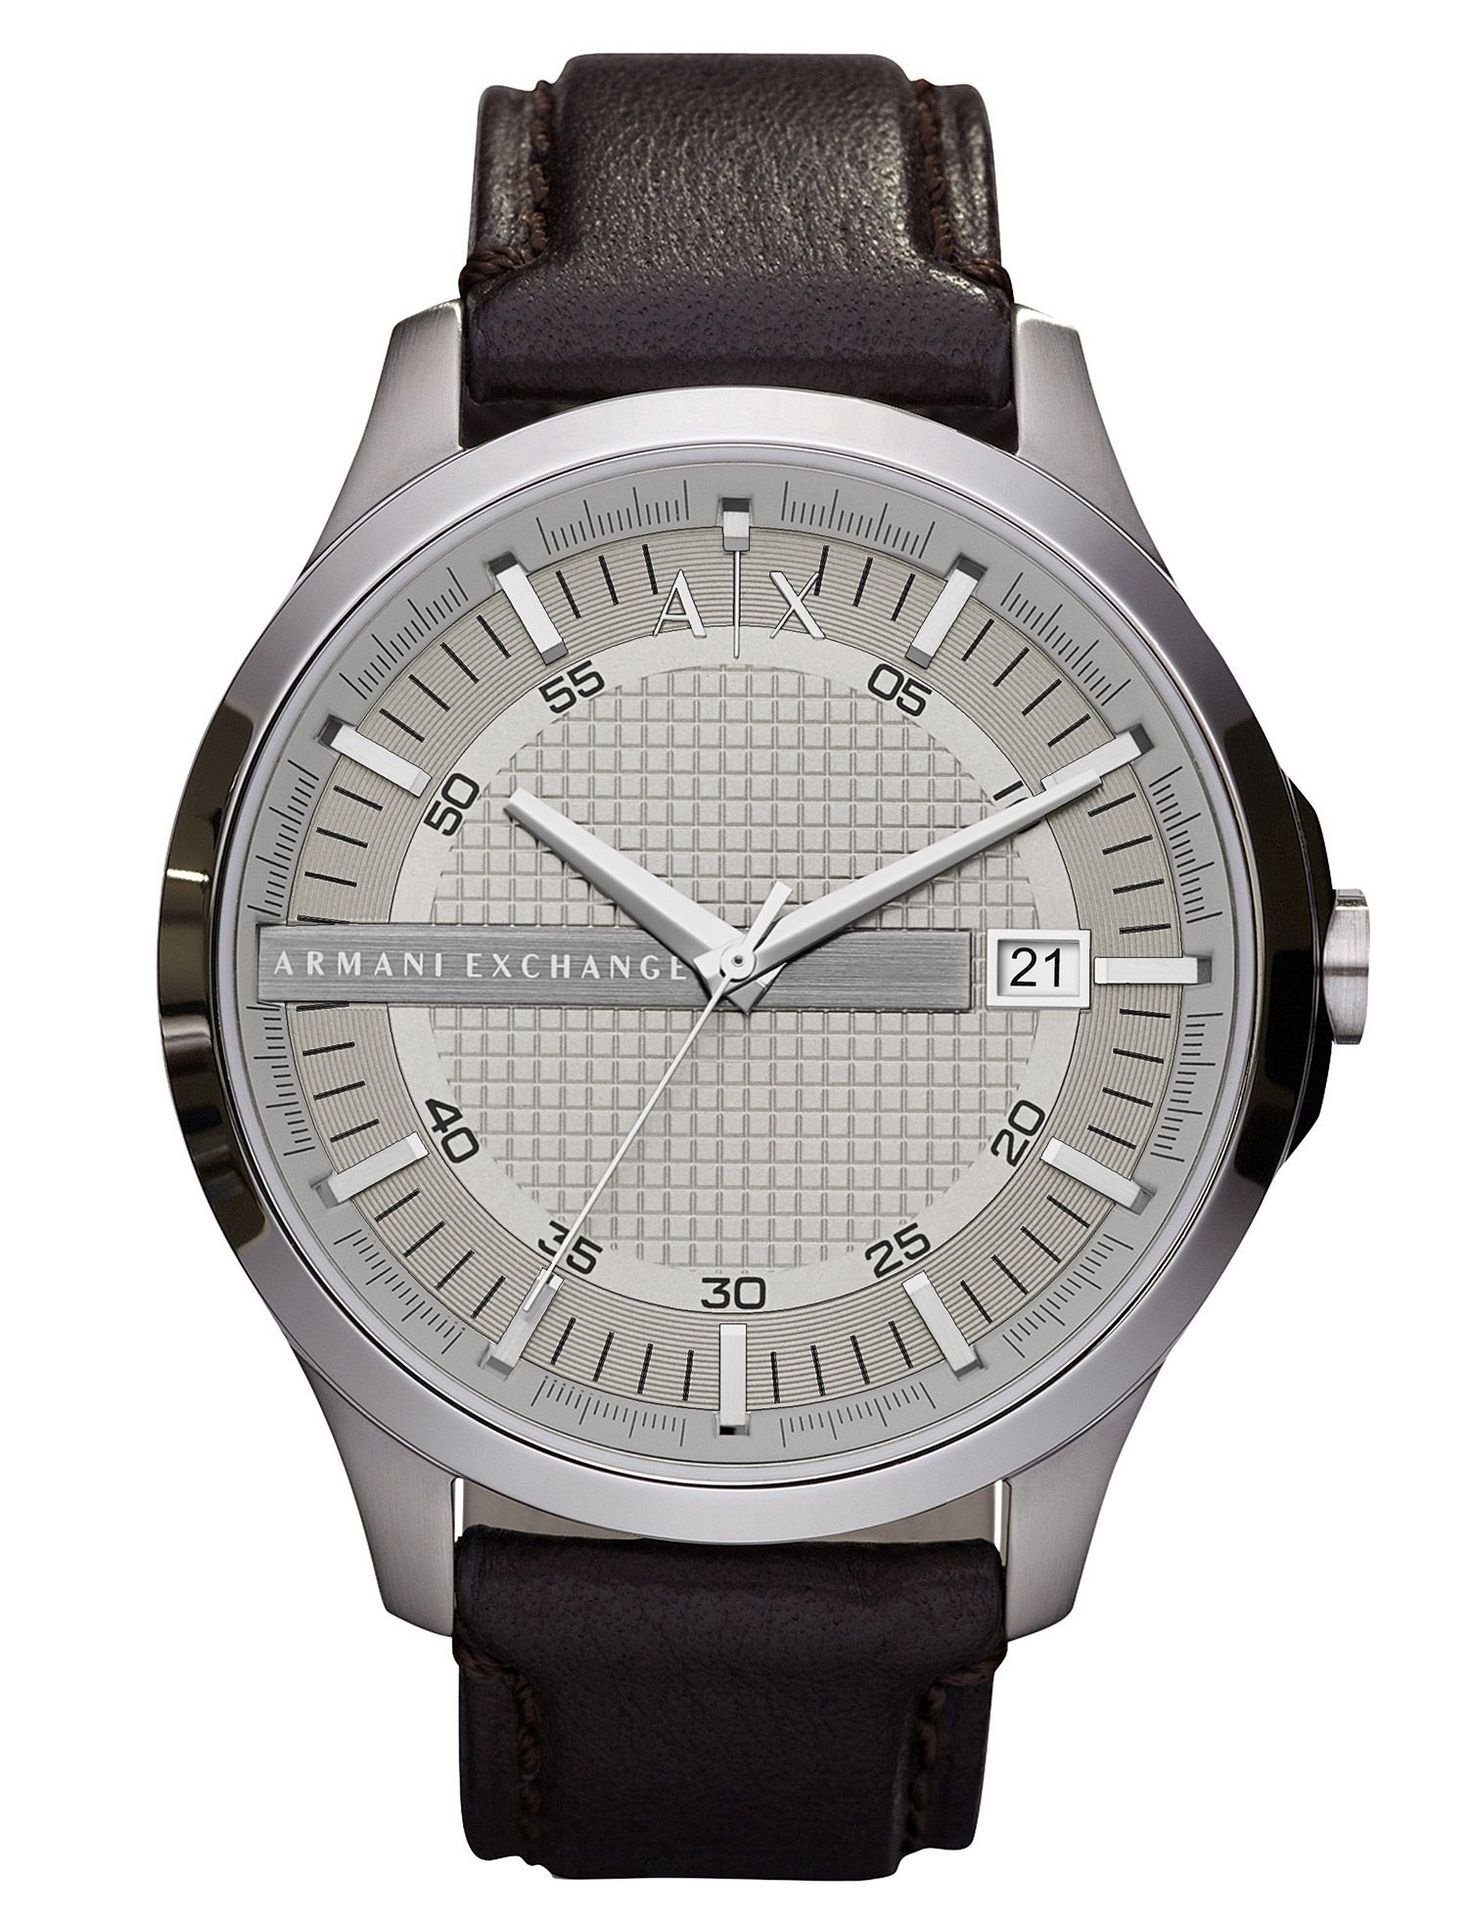 Armani Exchange - Stainless Steel Brown Leather Strap Watch | Guest and ...